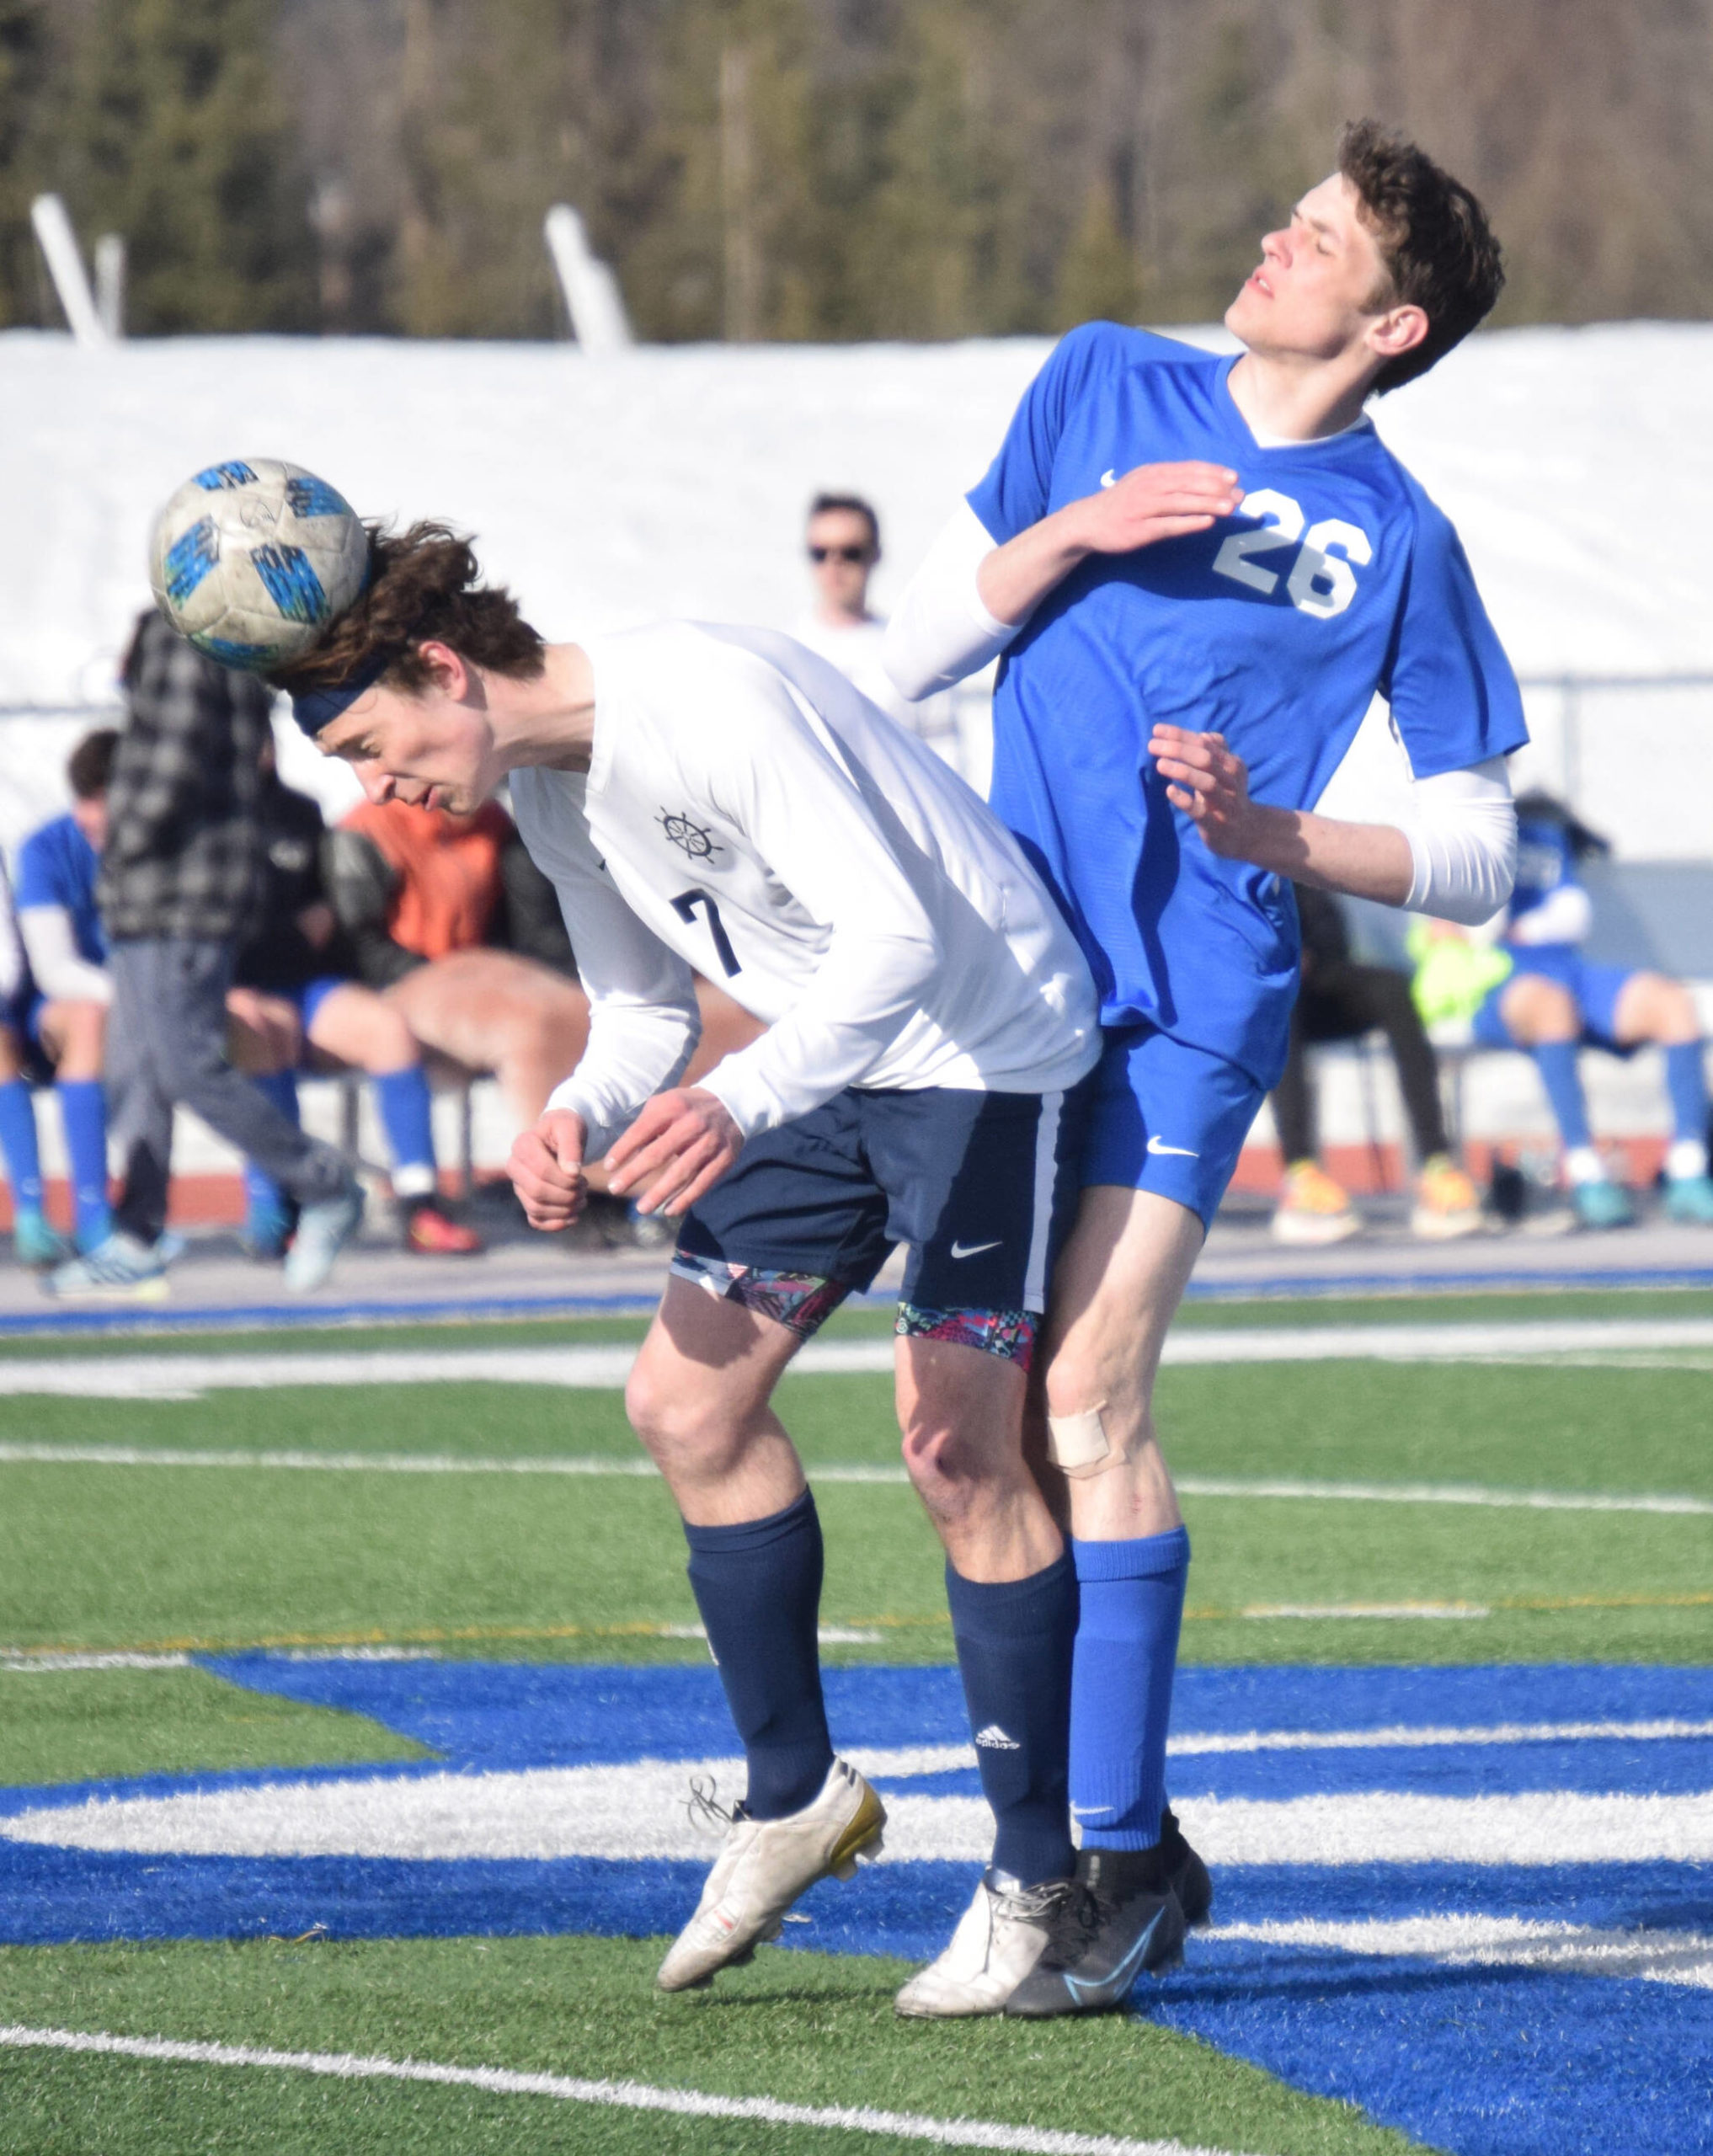 Homer's Jake Tappan heads the ball in front of Soldotna's Hamilton Hunt on Tuesday, April 19, 2022, at Soldotna High School in Soldotna, Alaska. (Photo by Jeff Helminiak/Peninsula Clarion)